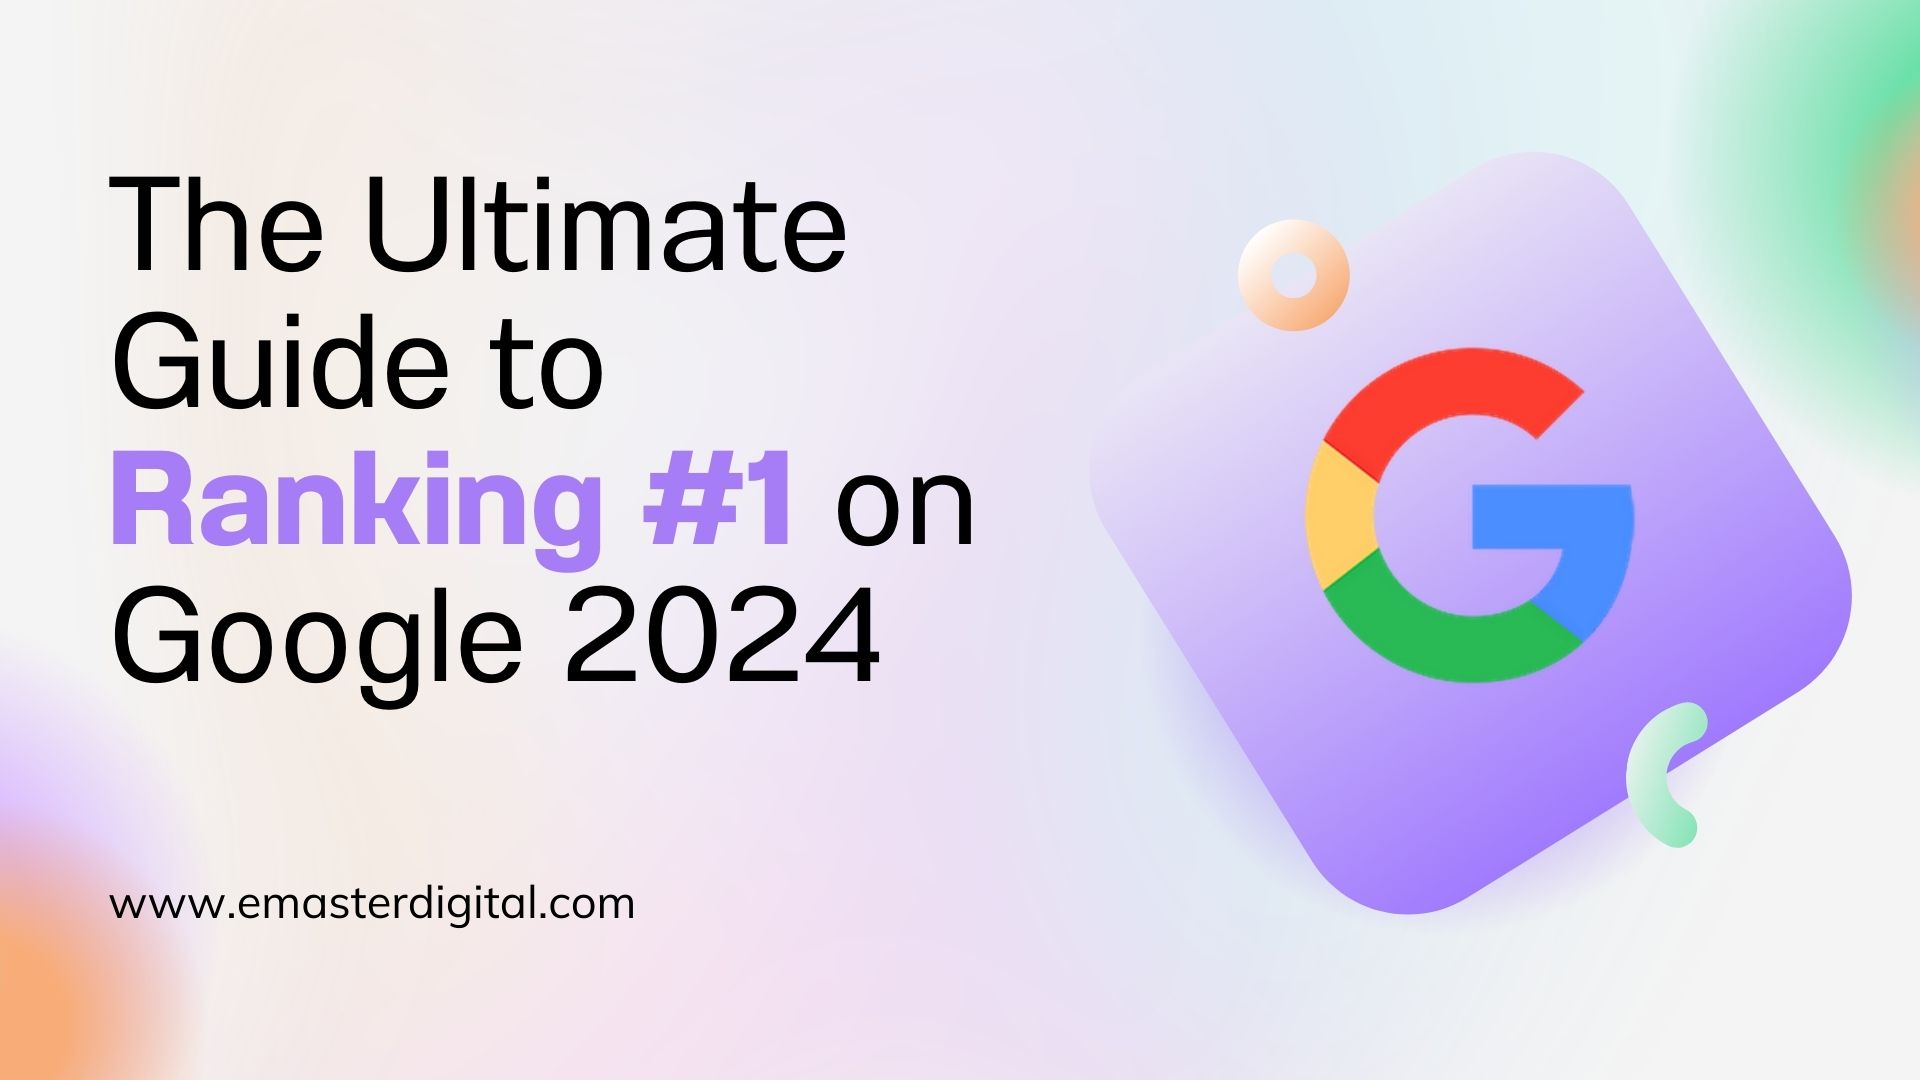 The Ultimate Guide to Ranking #1 on Google 2024